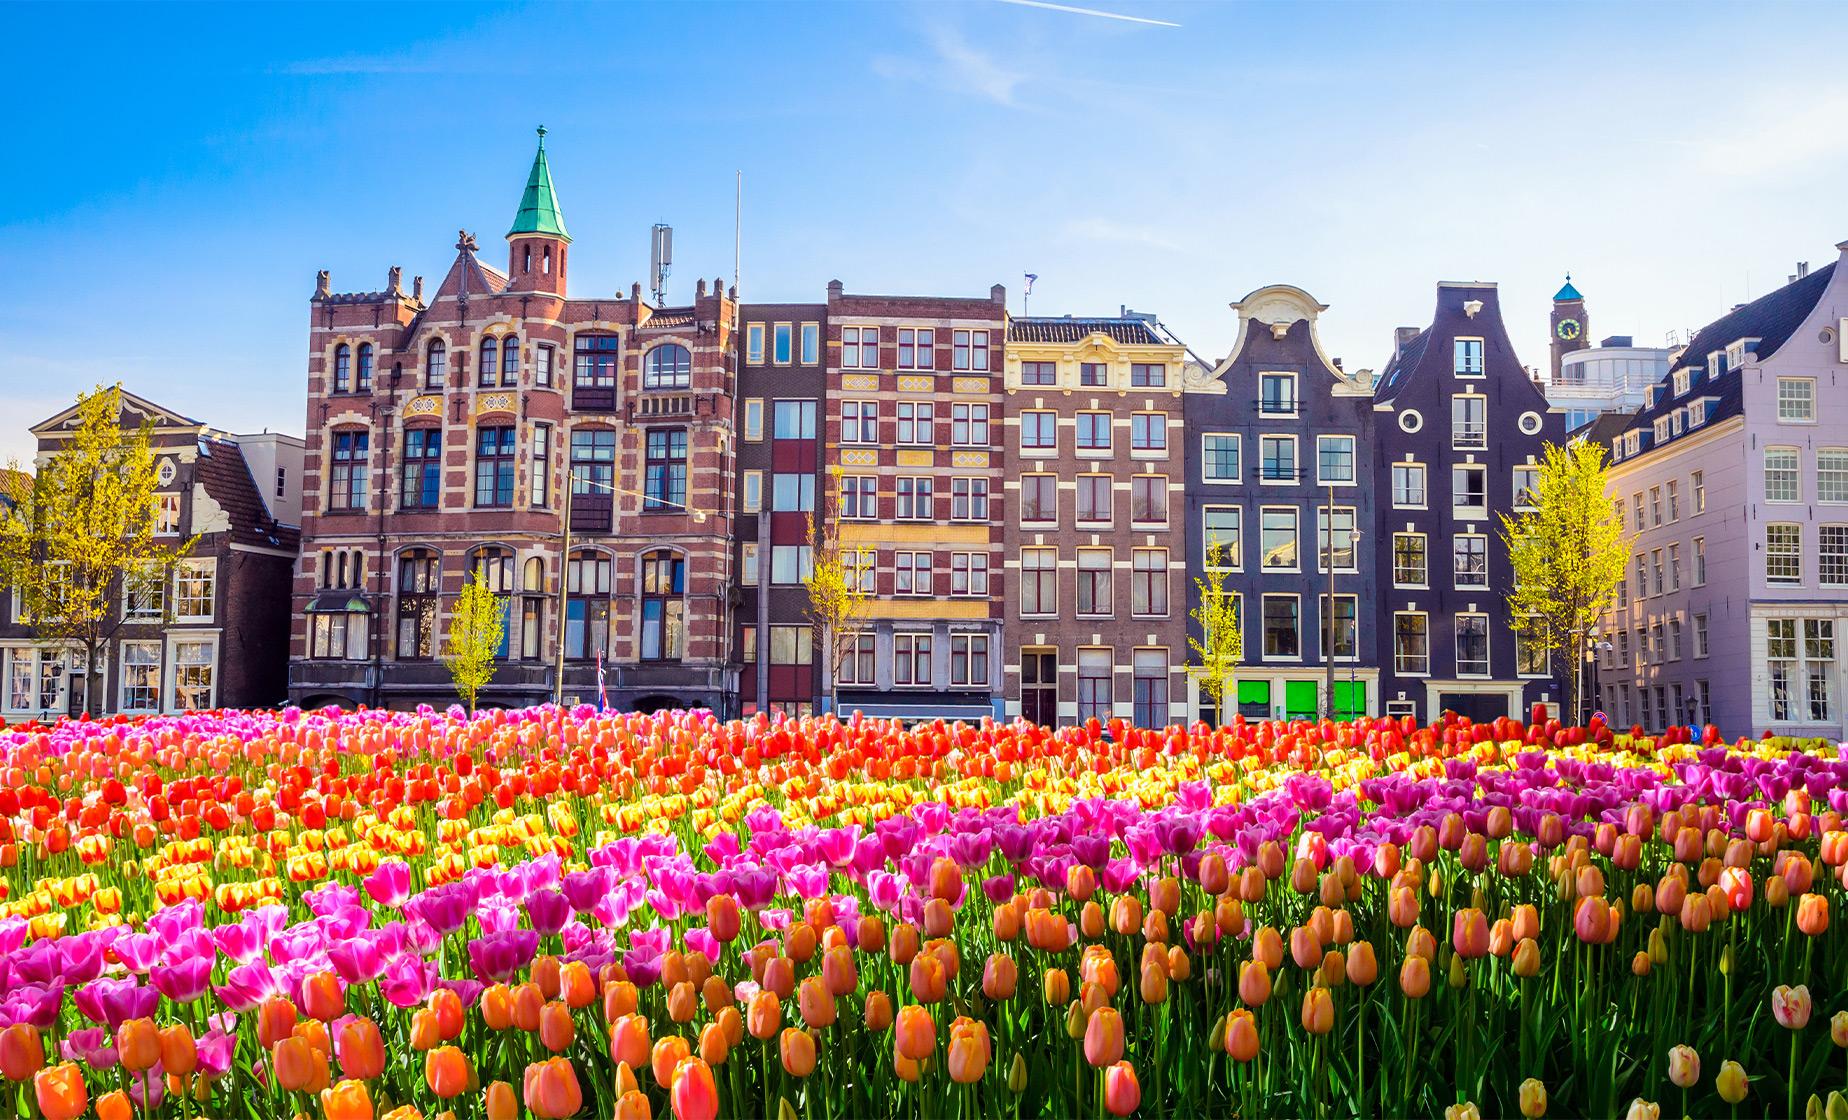 City Sightseeing Hop On and Hop Off Bus and Boat Tour in Amsterdam (Royal Palace)